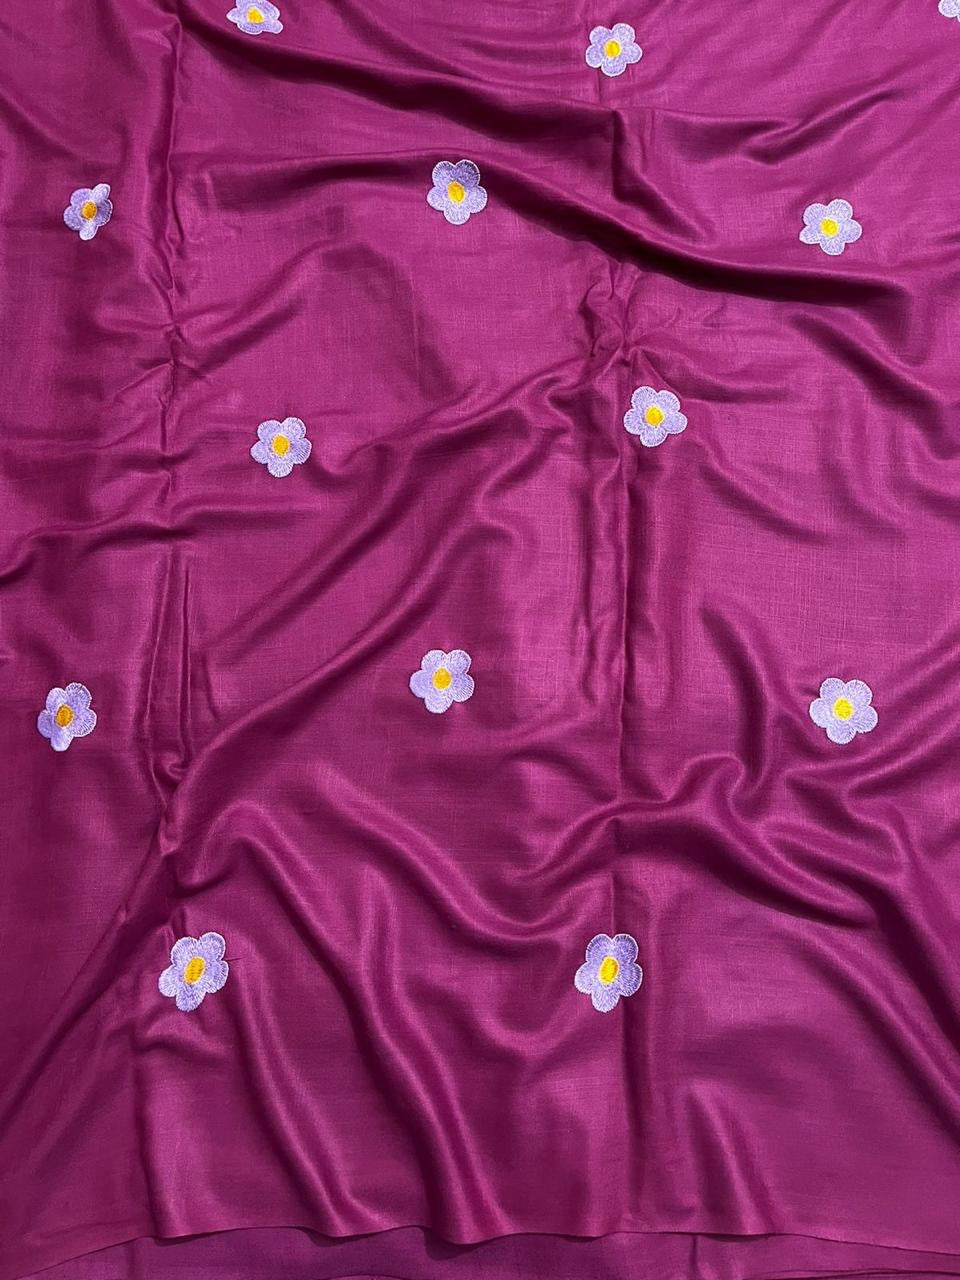 Handloom 100% Viscose Fabric with Embroidery motif - Magenta with Lavendar floral embroidery